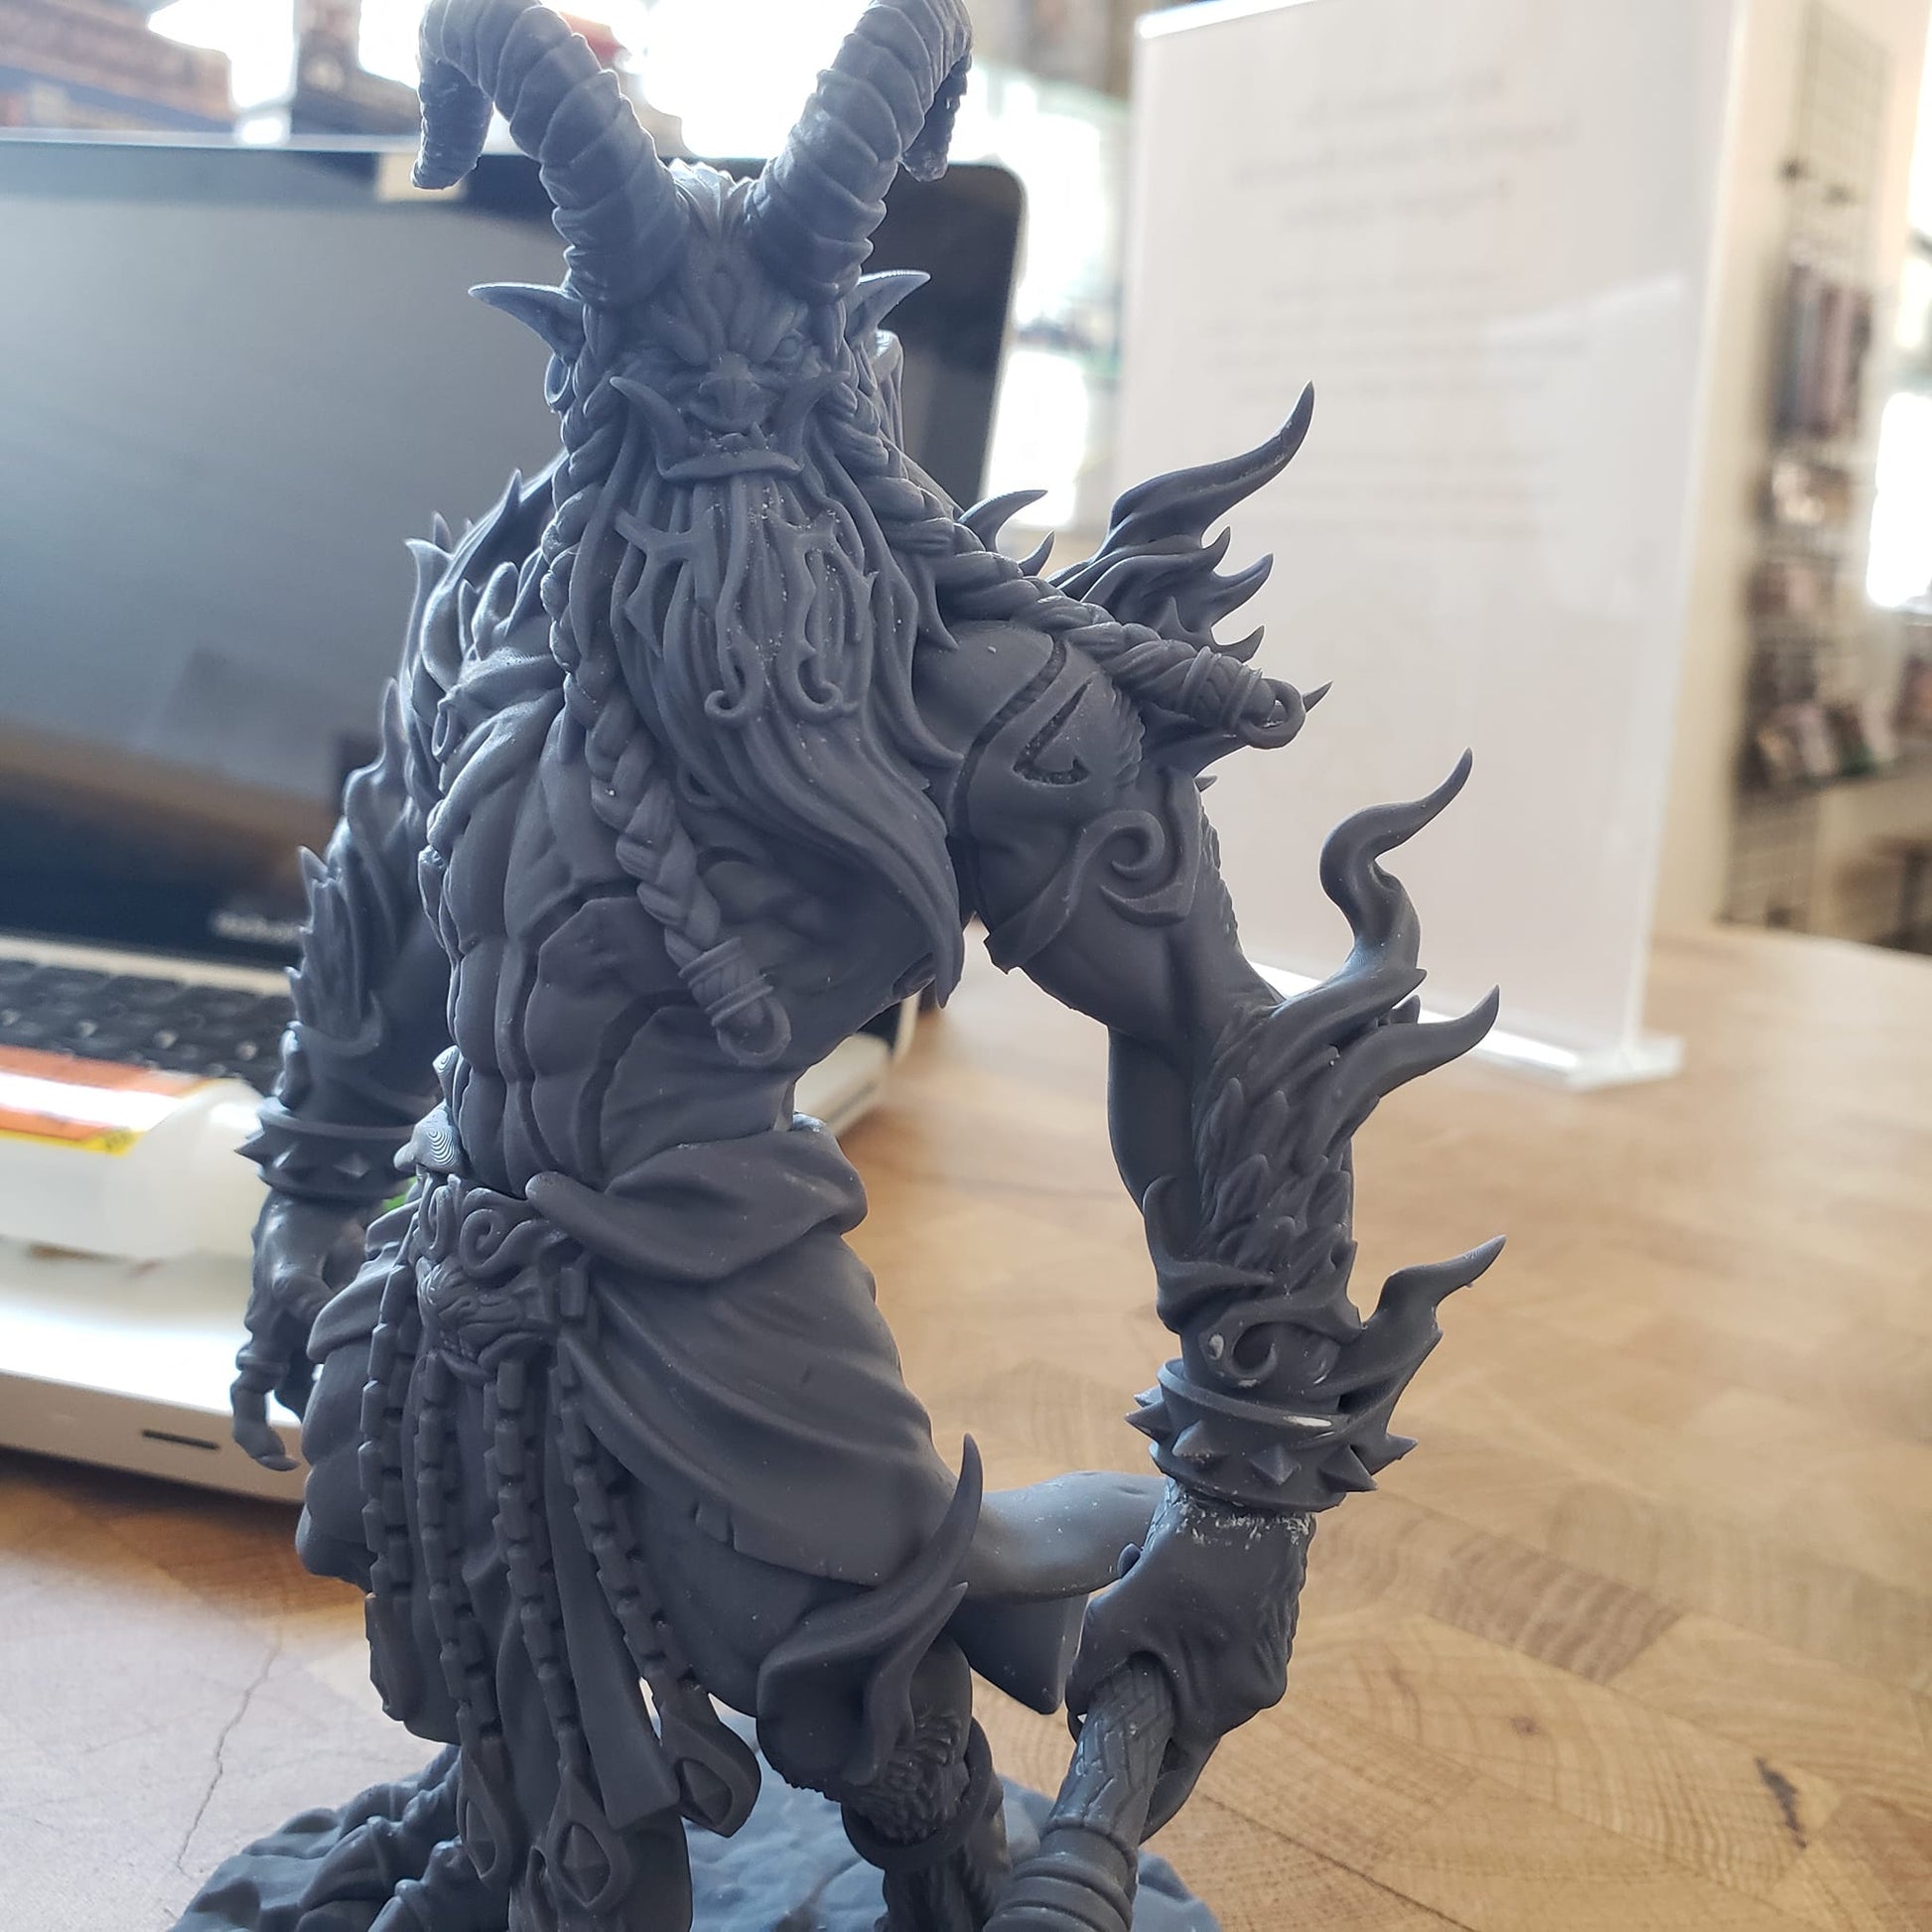 Image shows an example of a 3D printed ifrit gaming miniature printed in-house at All Systems Go